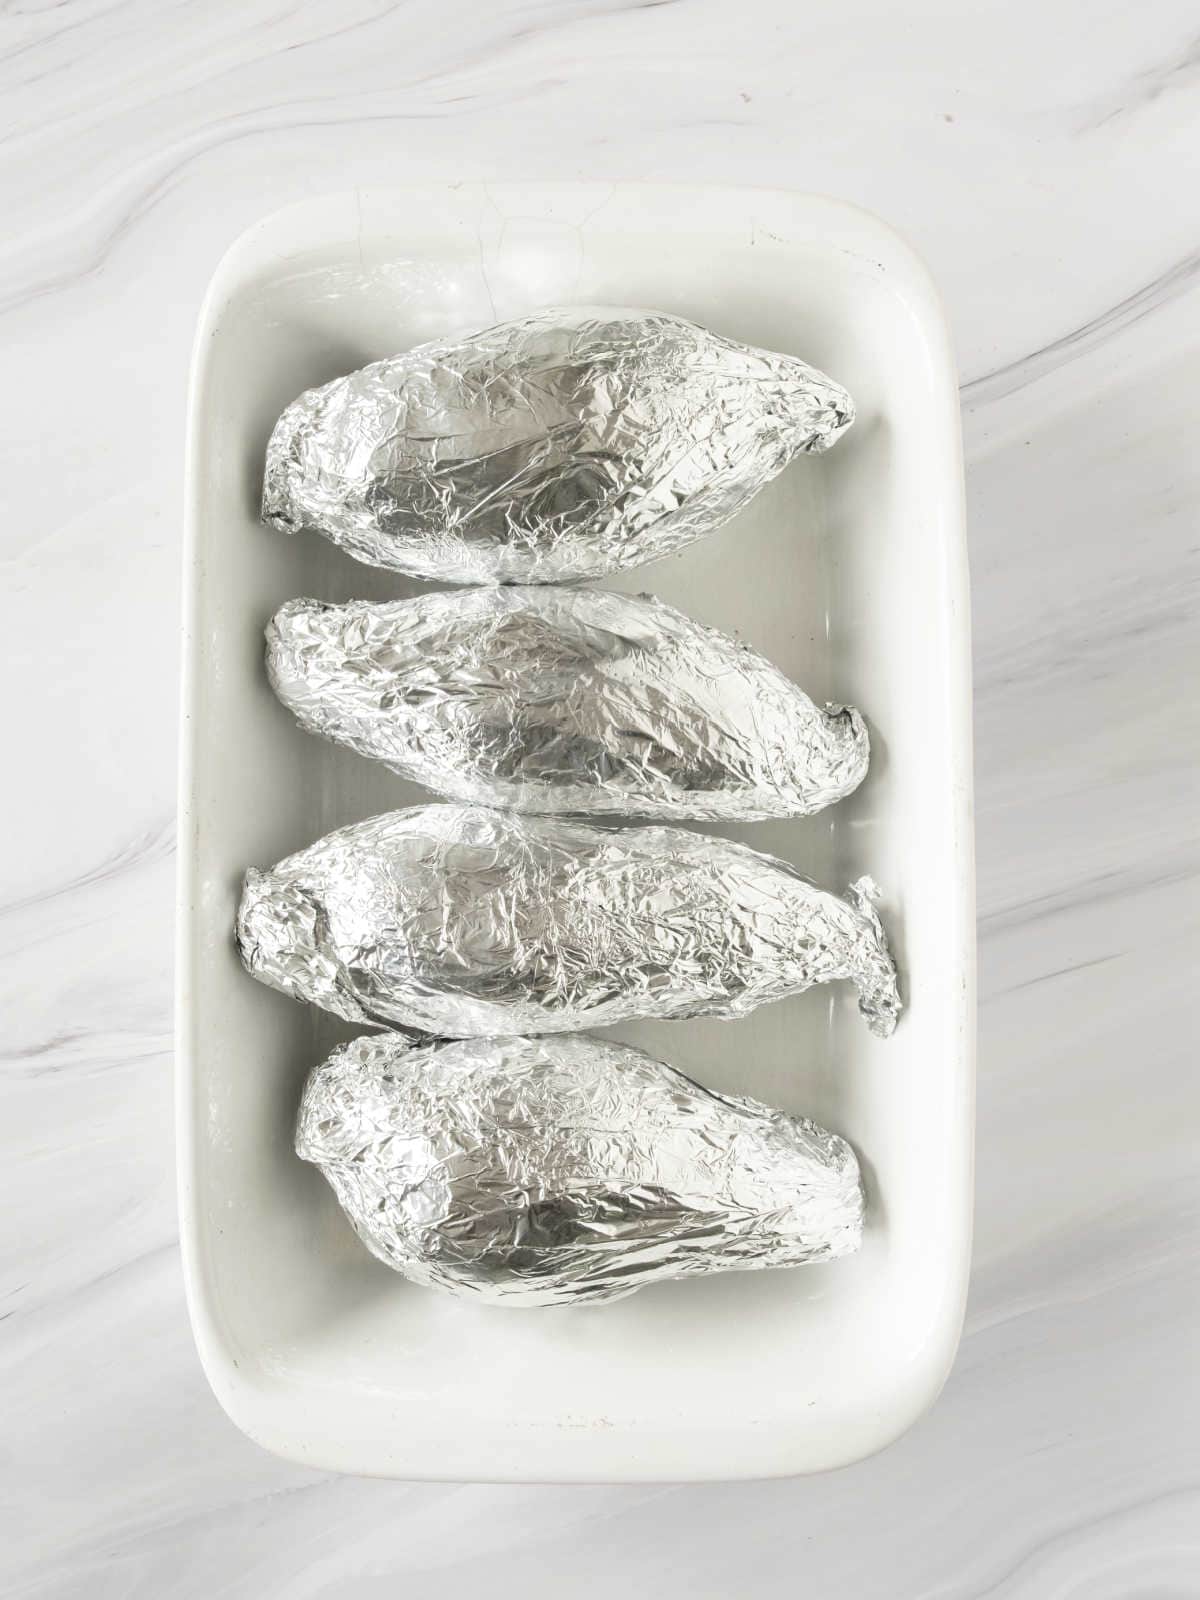 Four foil-wrapped sweet potatoes in a white baking dish on a white marbled surface.